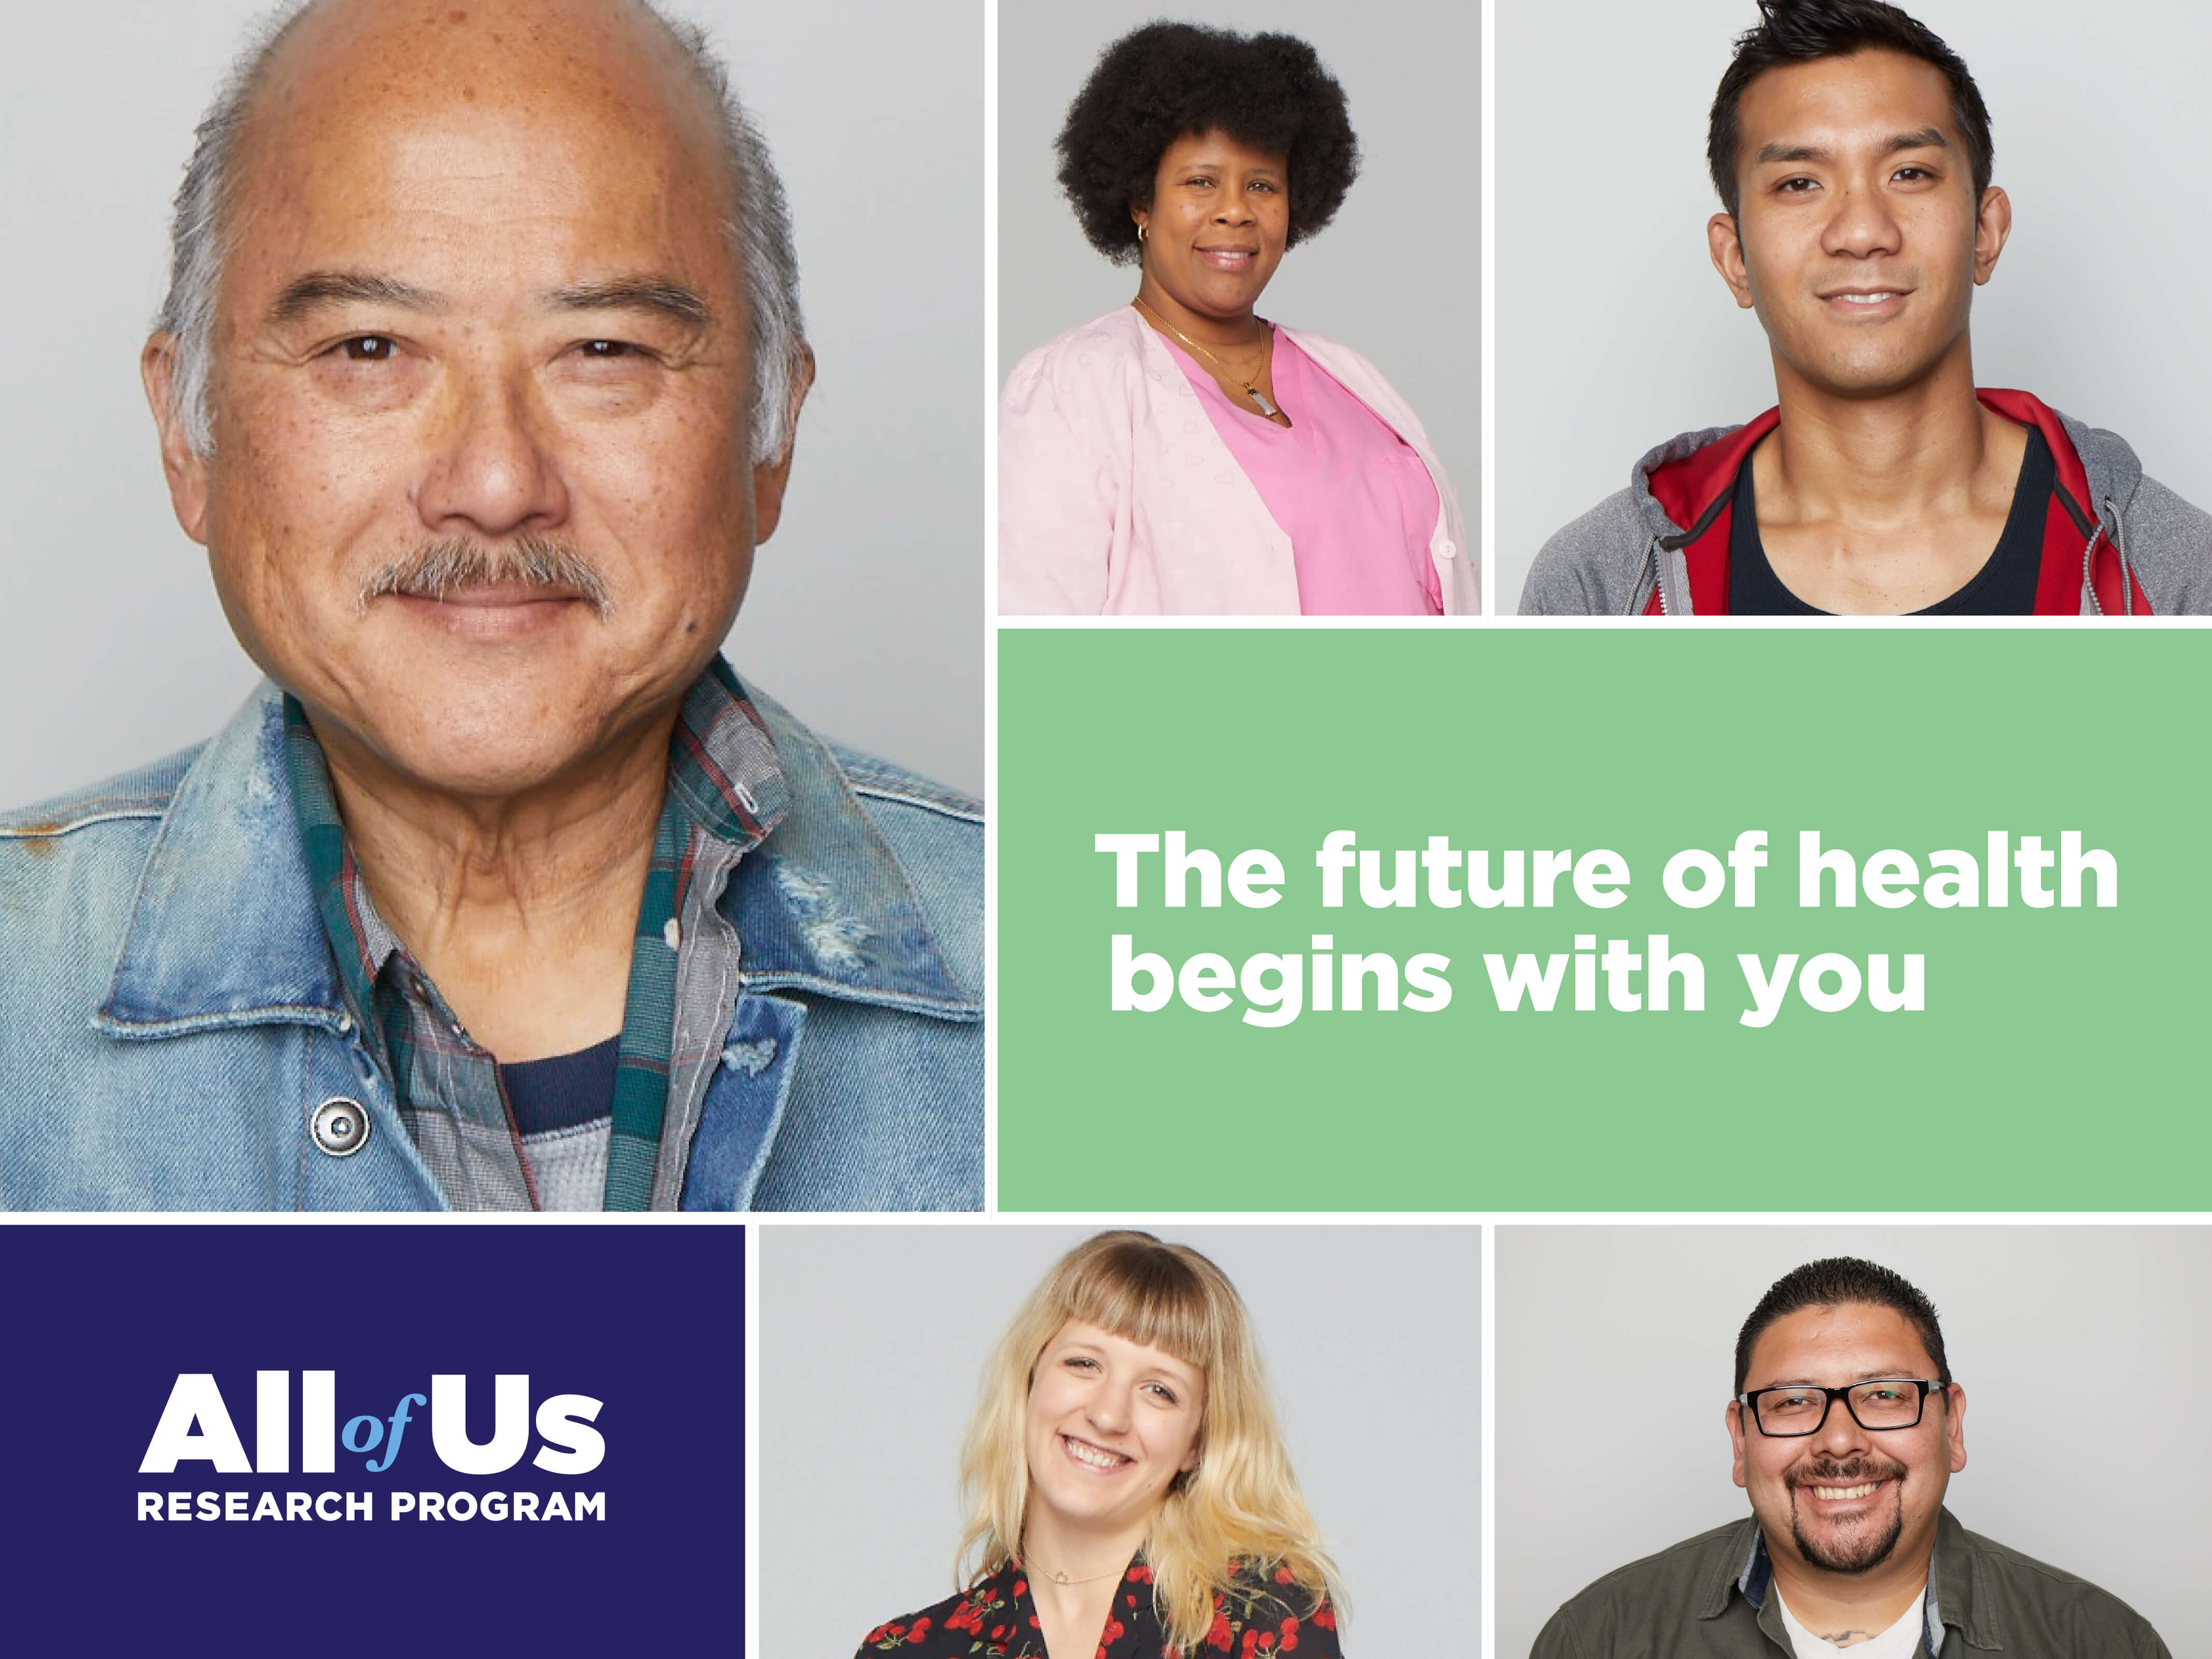 Tiled image with five images of diverse people, the All of Us logo, and the words The future of health begins with you